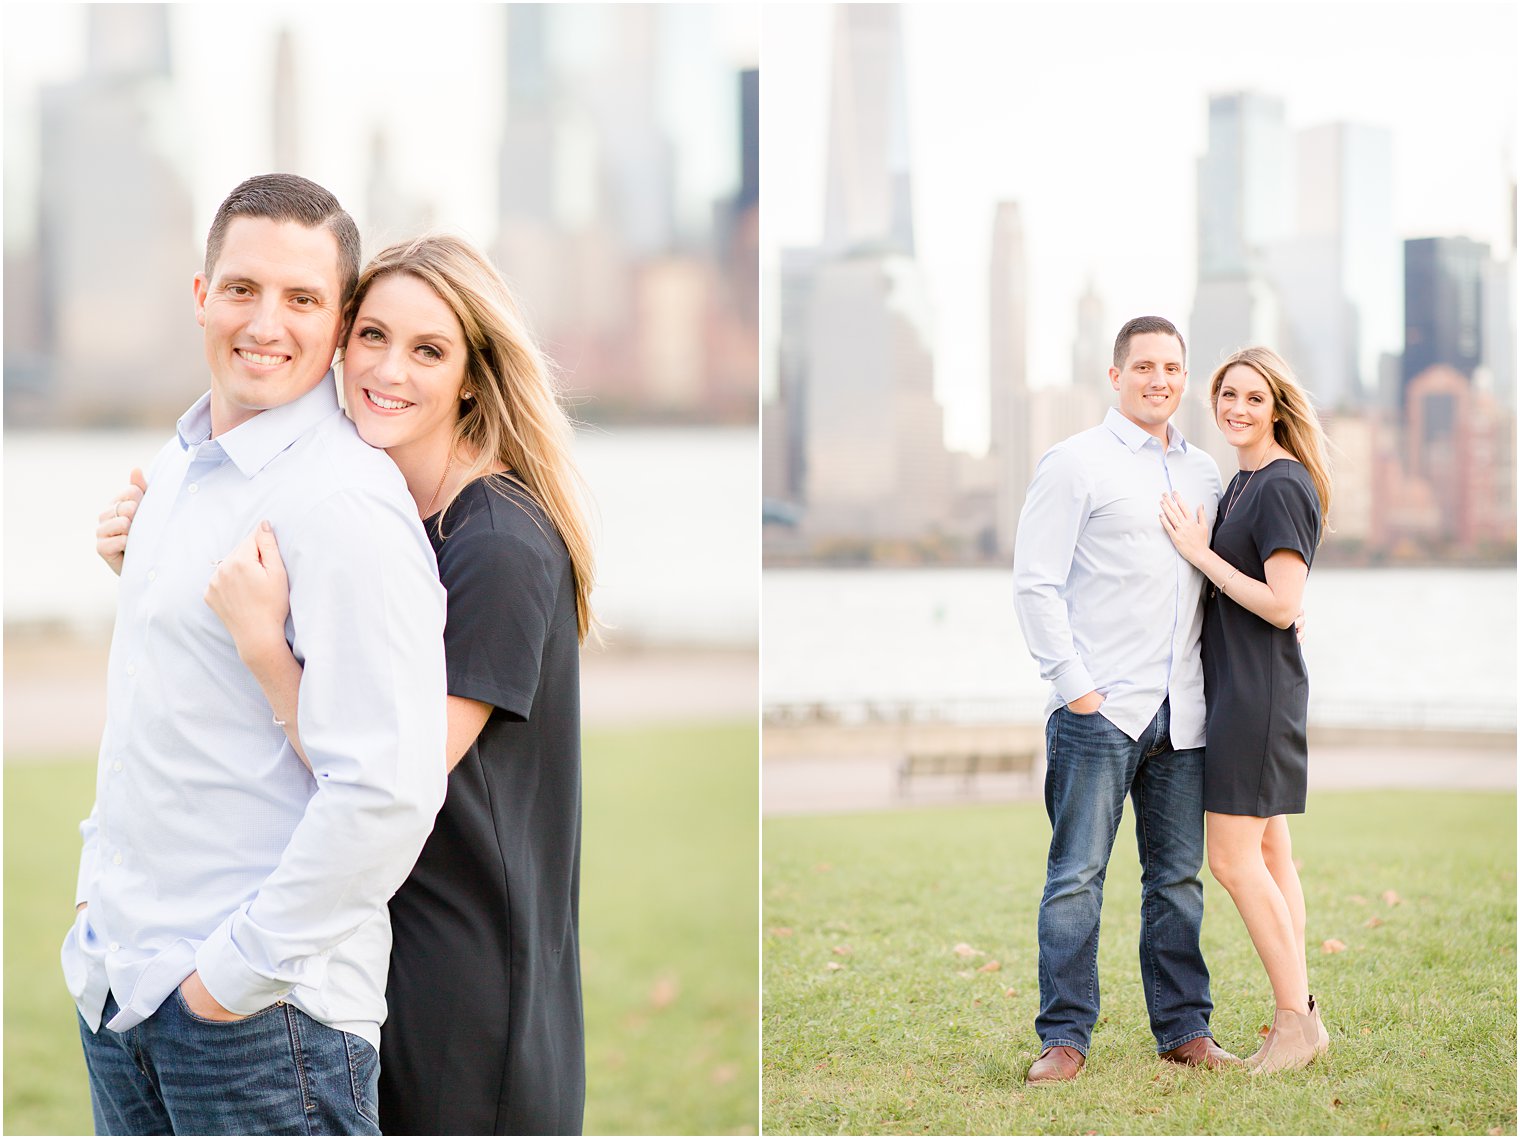 Engagement photos with NYC skyline